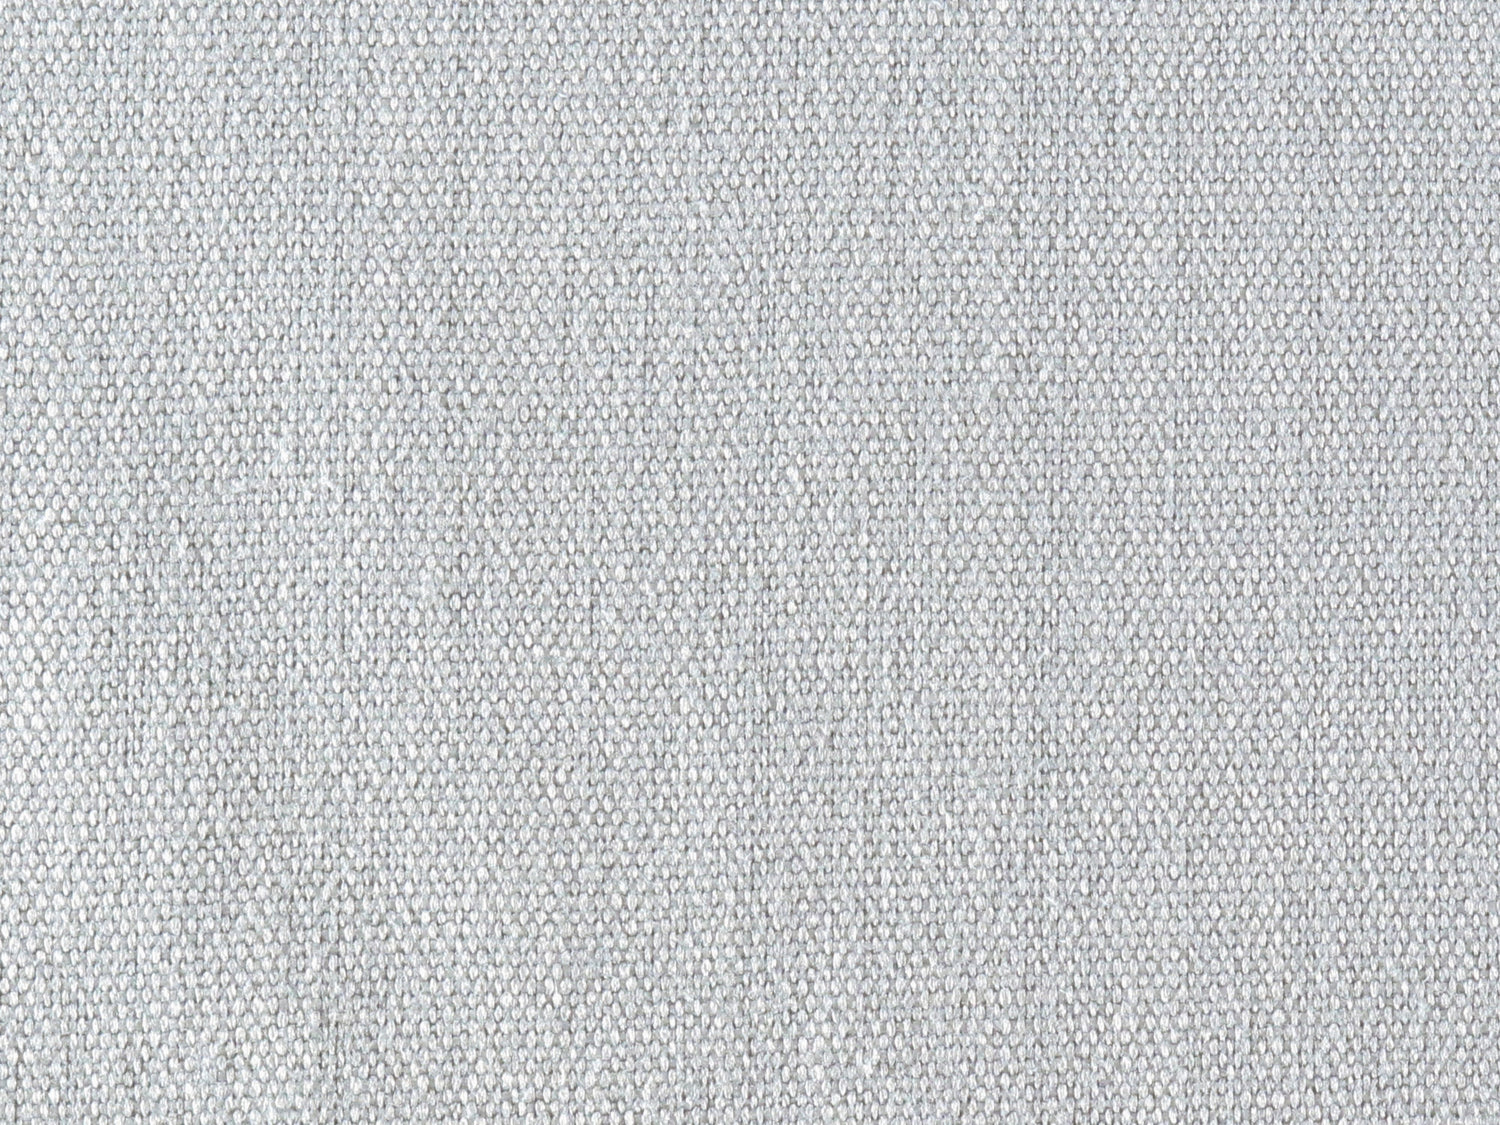 Lakeside Linen fabric in zephyr color - pattern number PK 0004LAKE - by Scalamandre in the Old World Weavers collection